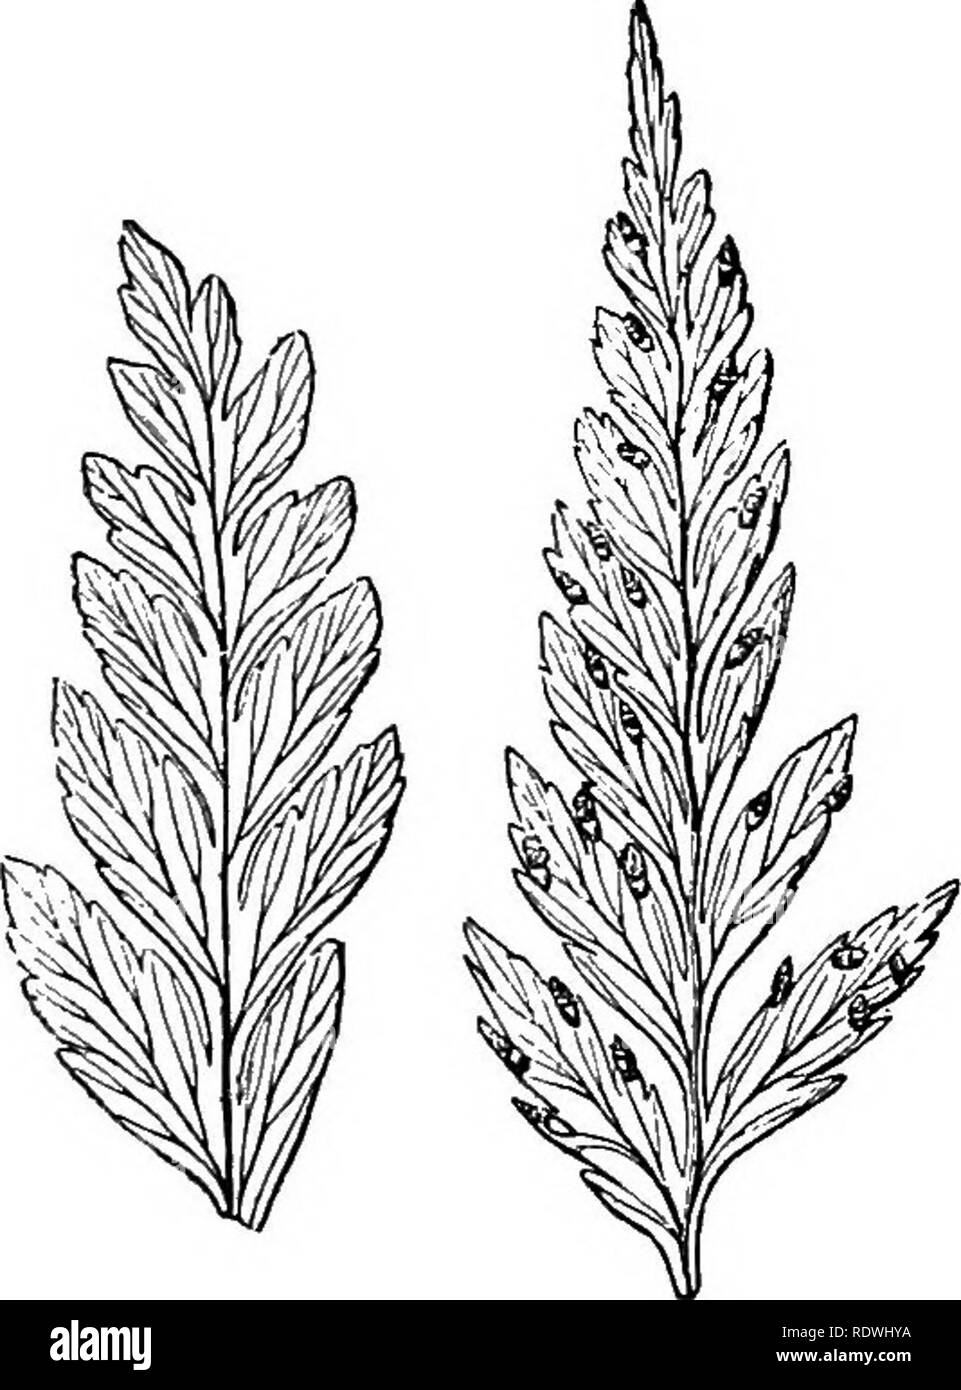 . Ferns: British &amp; foreign. The history, organography, classification, and enumeration of the species of garden ferns with a treatise on their cultivation, etc. etc. Ferns. 23 !â feii:n's : bkitish and foeeion. 122. LOXSOMA,B. Pr. Vernation uniserial, sarmentose. Fronds long etipitate, doltoid, decompound, 1-14 foot high, glaucous beneath; lacinisa lanceolate, dentate. Veins simple or forked; venules free, their apices prolonged, forming a free columnar receptacle. Sjoecial. Genus 122-âPortions of barren and fertile frond, natural sizej ditto, enlarged. No. 1. and Accessory Indusia united Stock Photo